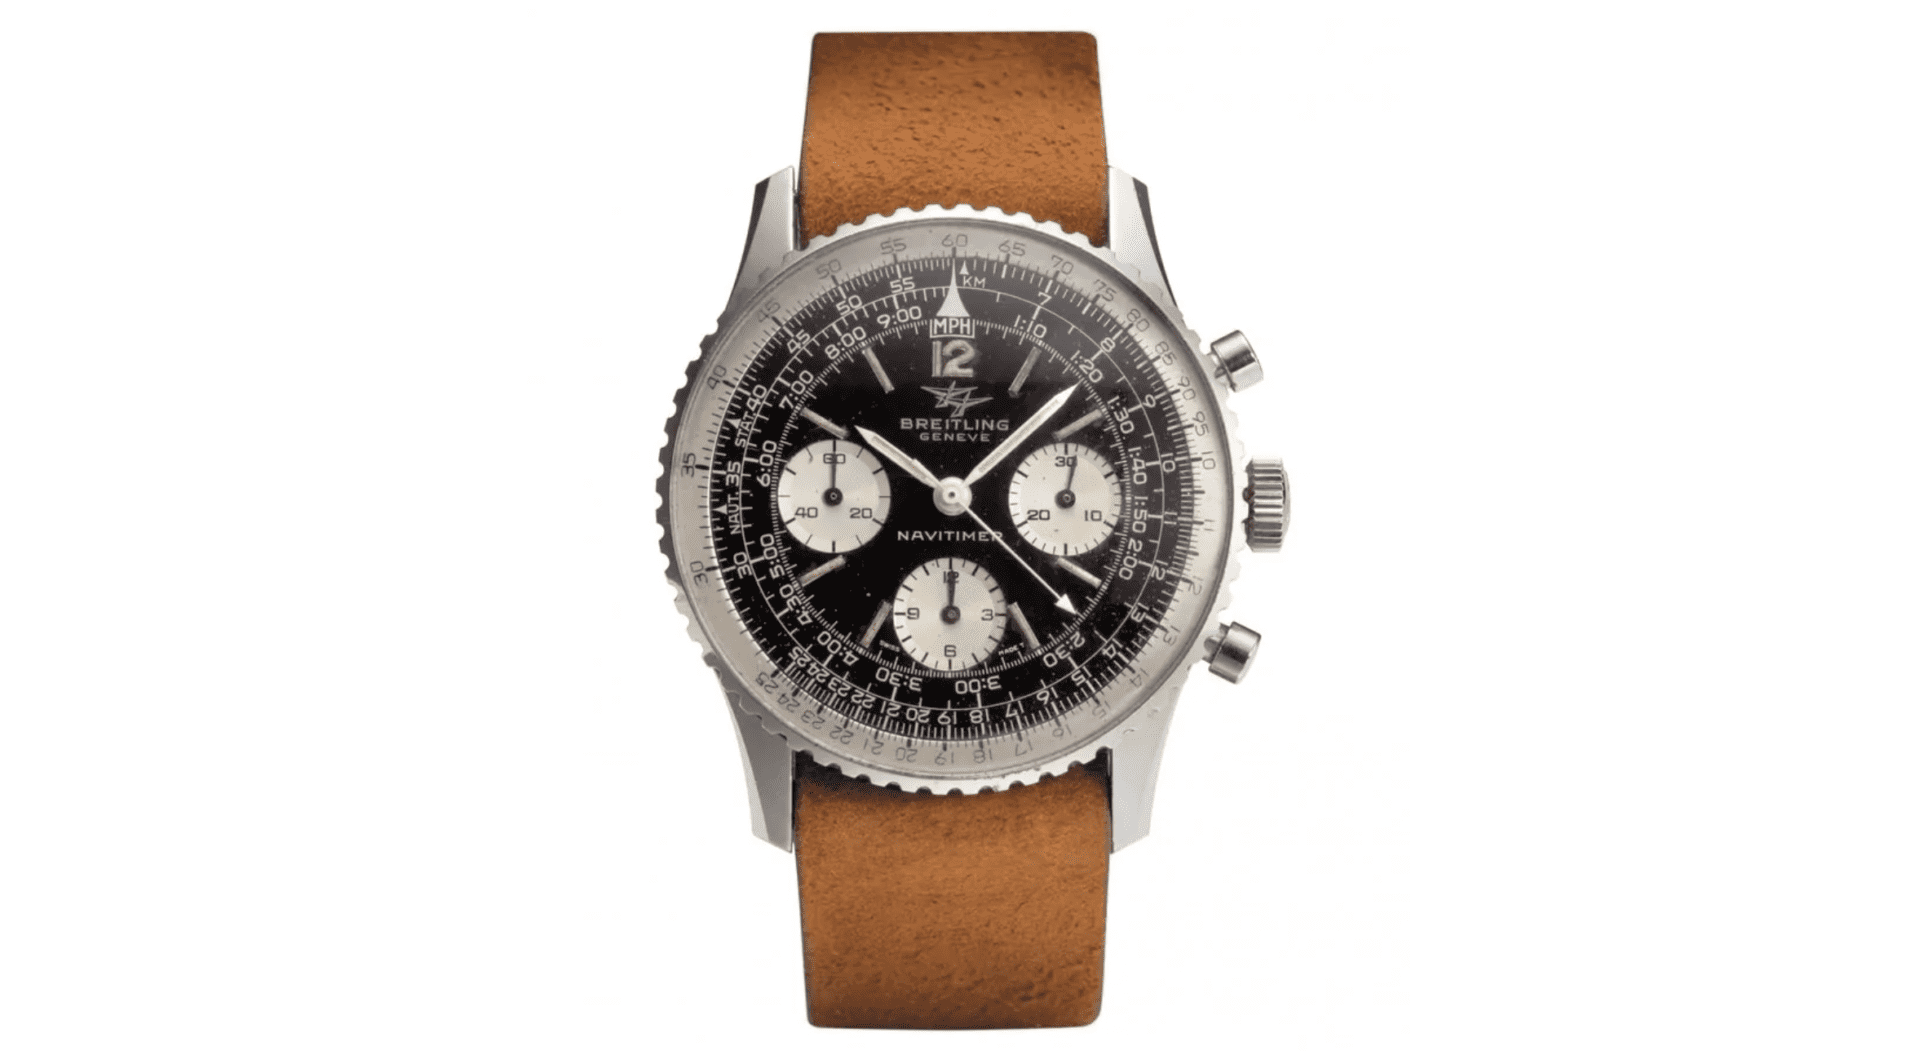 THE ICONS: Built for the cockpit, the Breitling Navitimer is a true pilot’s watch